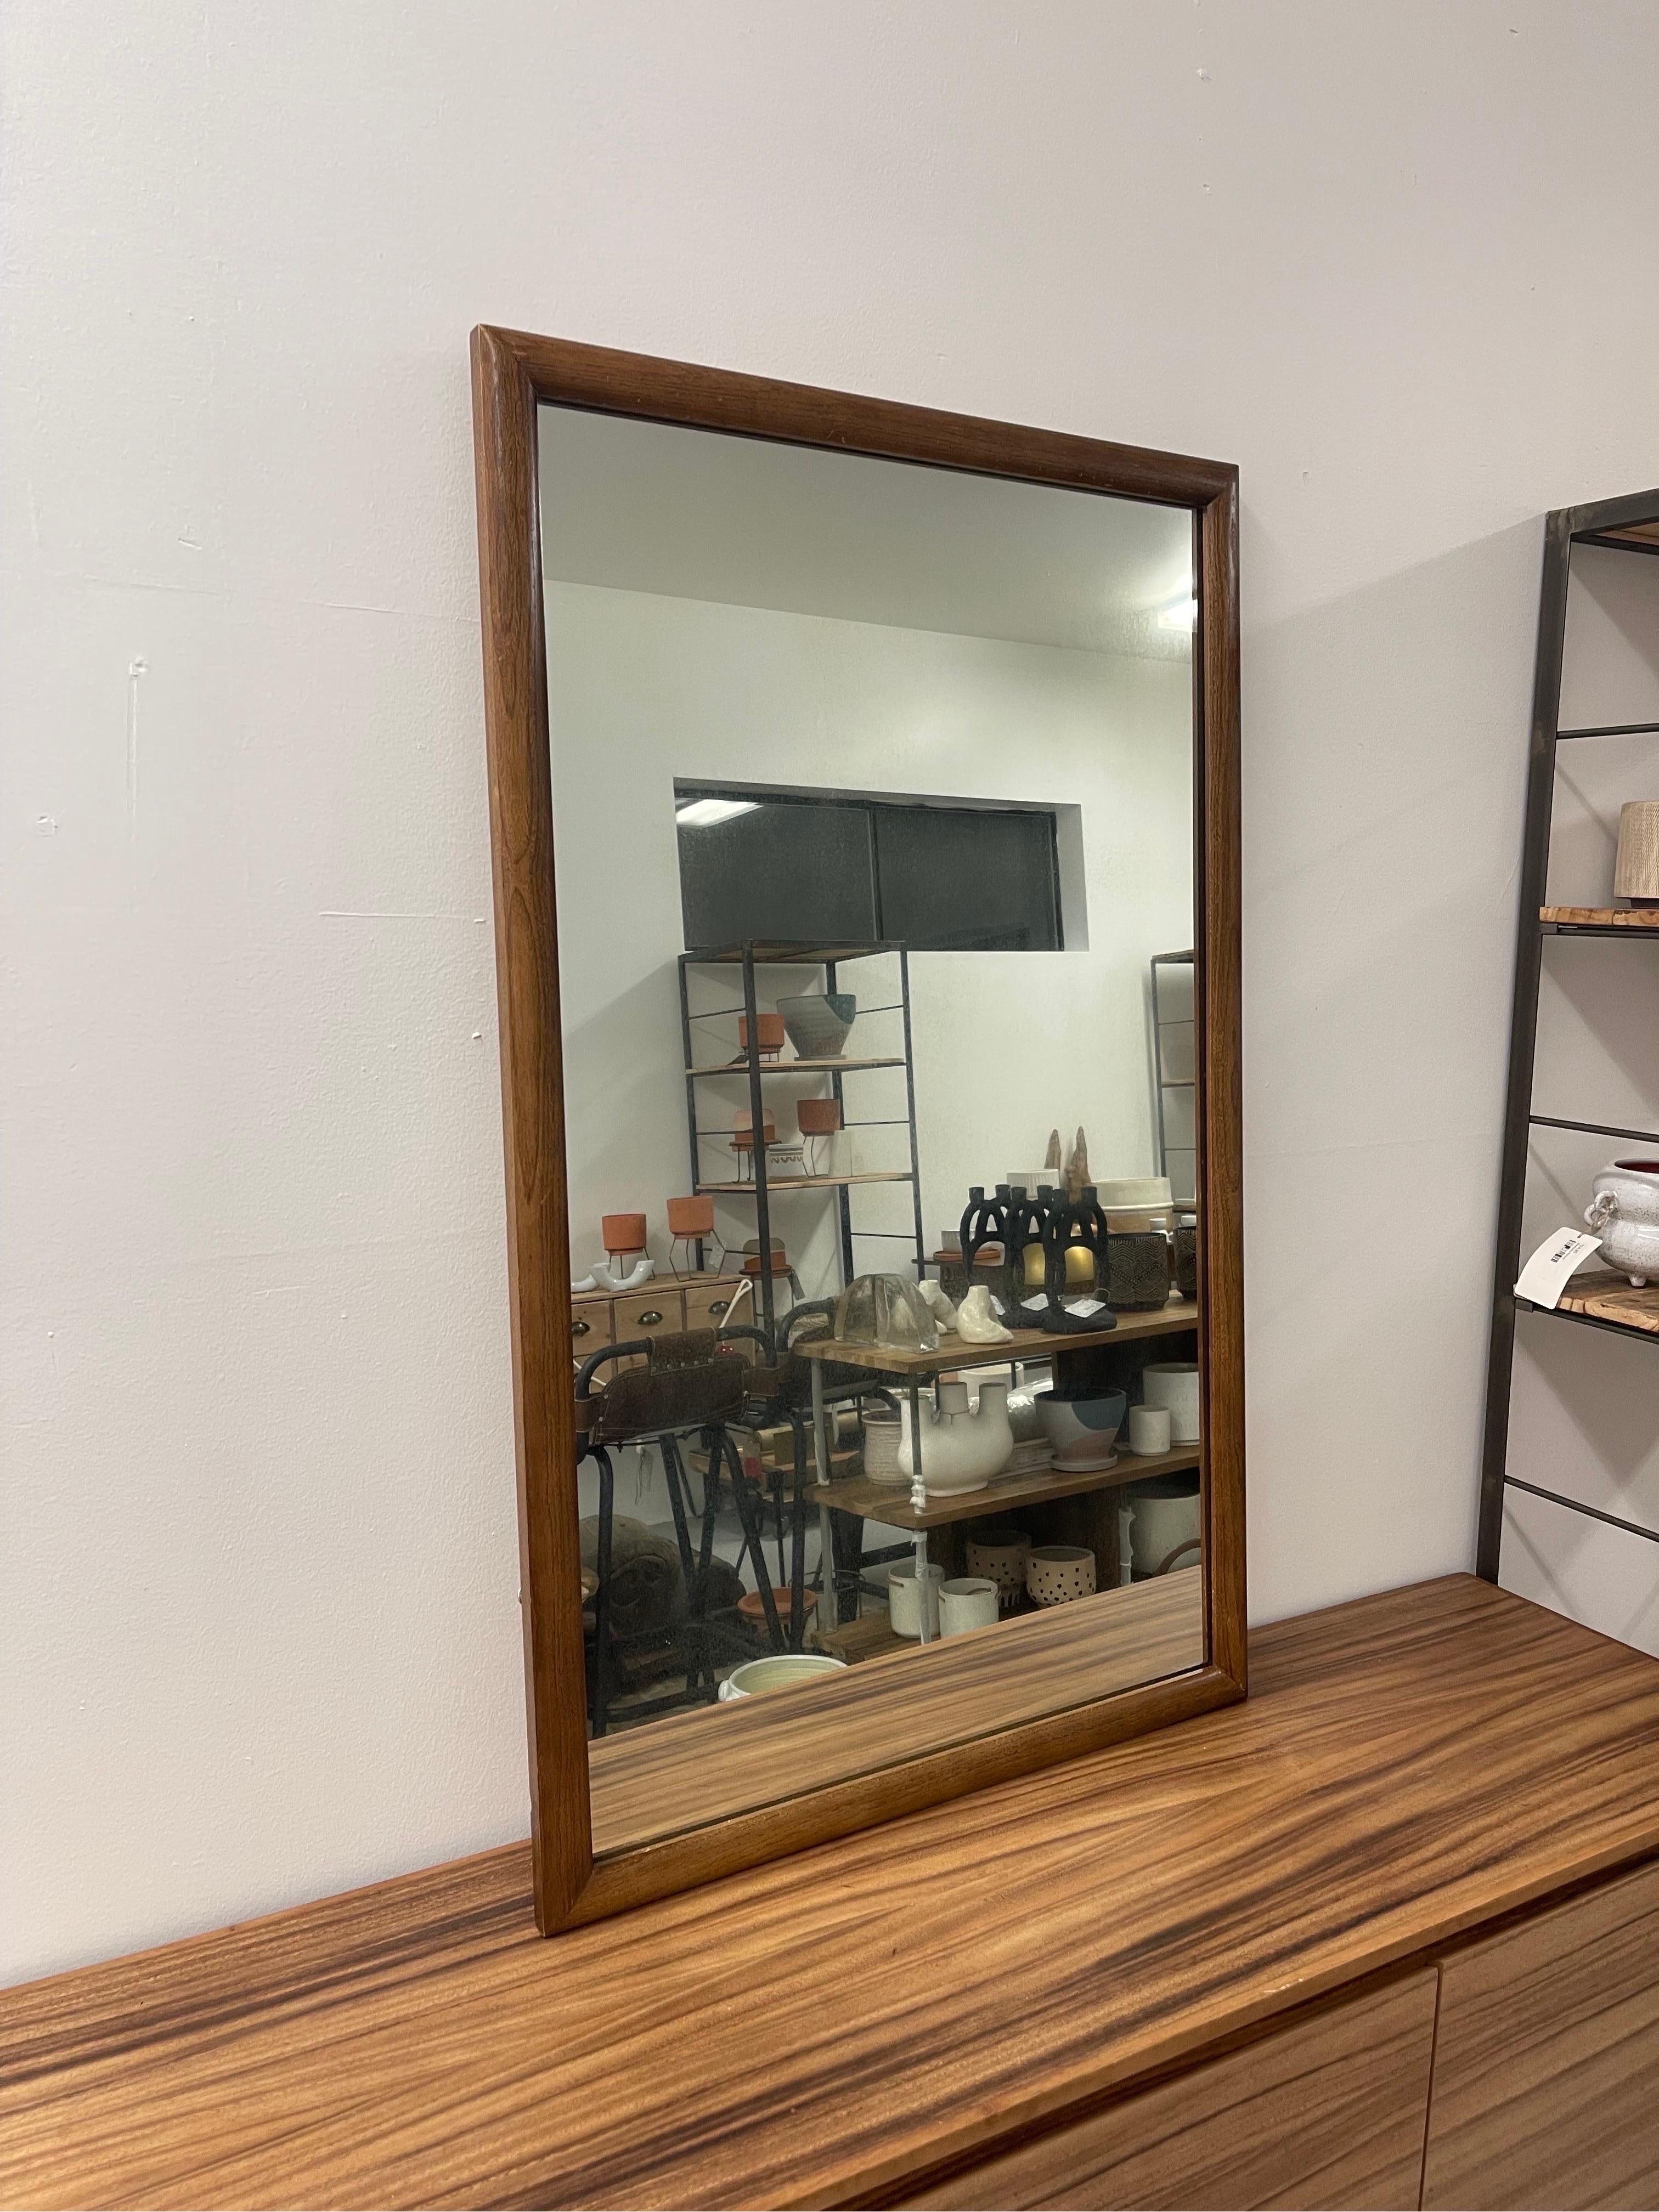 Vintage Mid Century Modern Walnut Framed wall Mirror by Airy Furniture Co.

Dimensions. 26 W ; 42 H